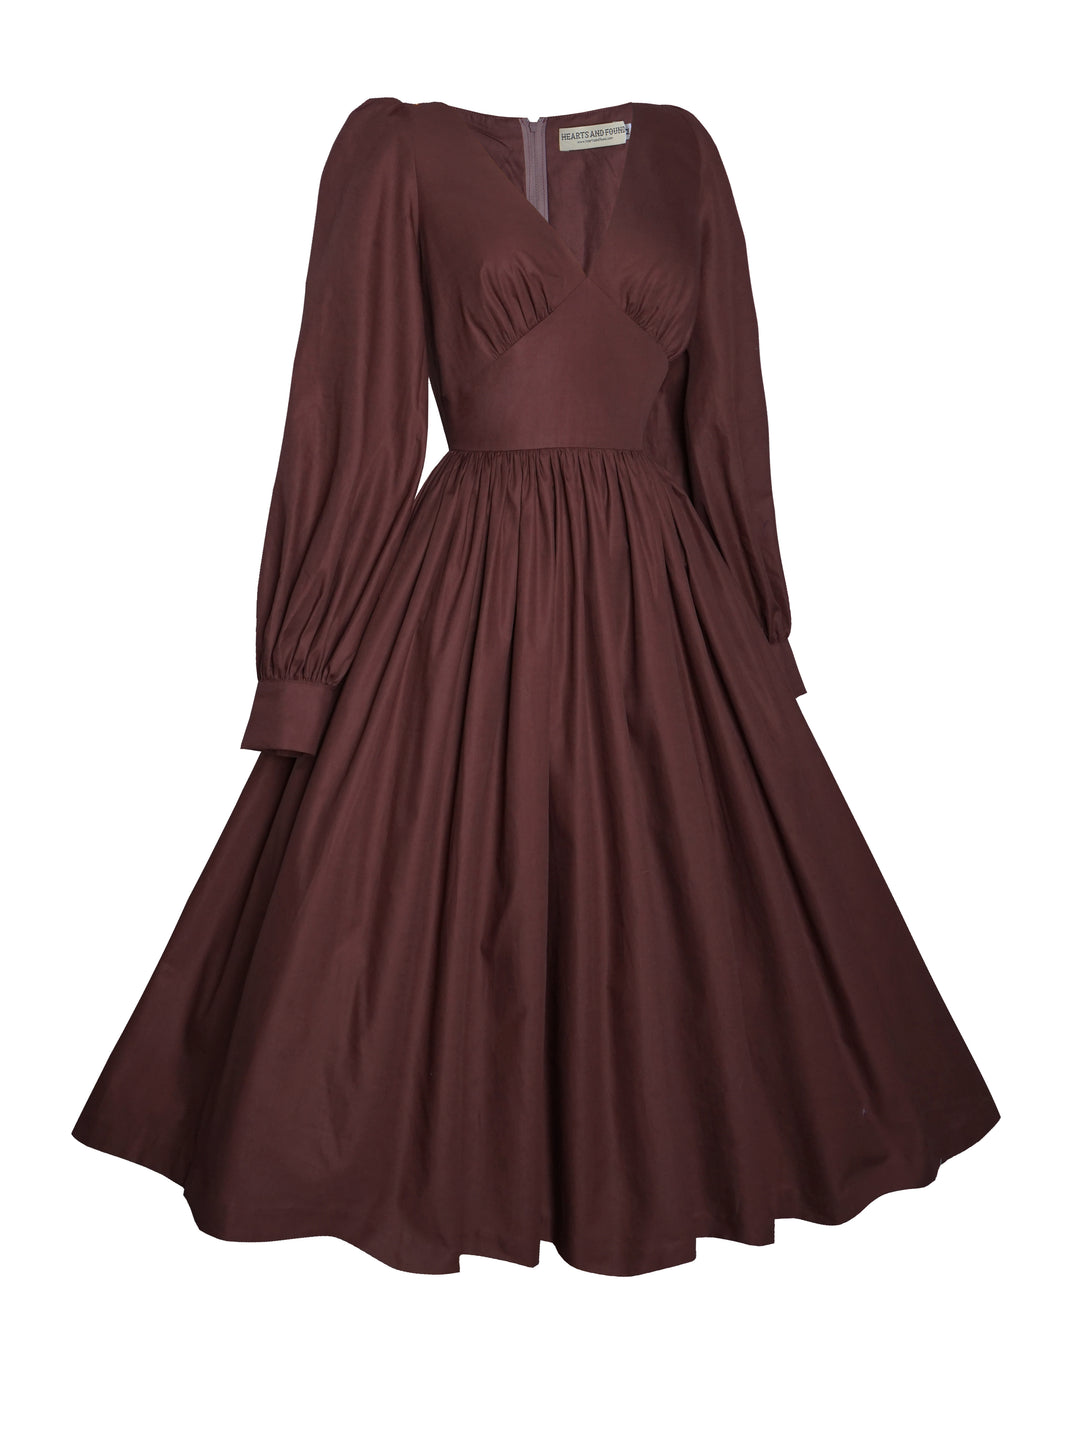 MTO - Harlow Dress in Hickory Brown Cotton